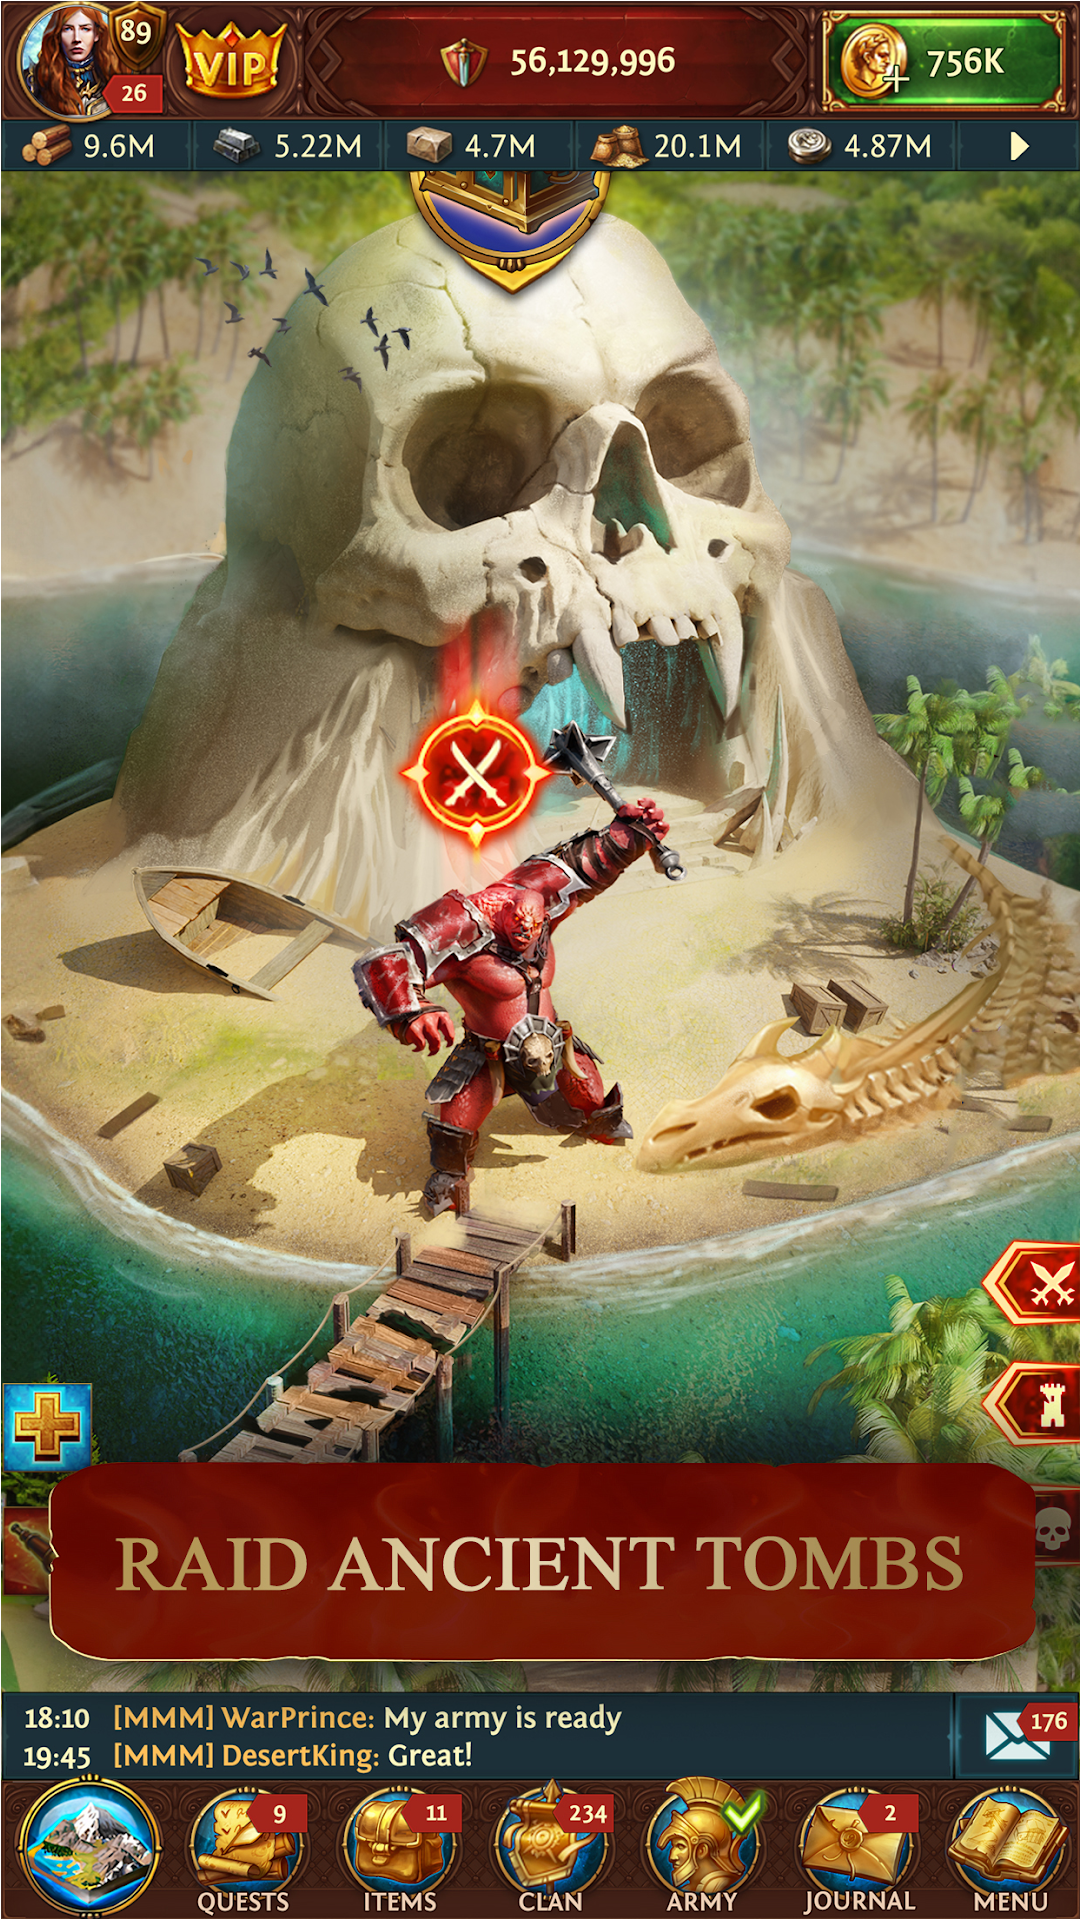 Baixe Total Battle 322.4.2148-arm64-v8a para Android